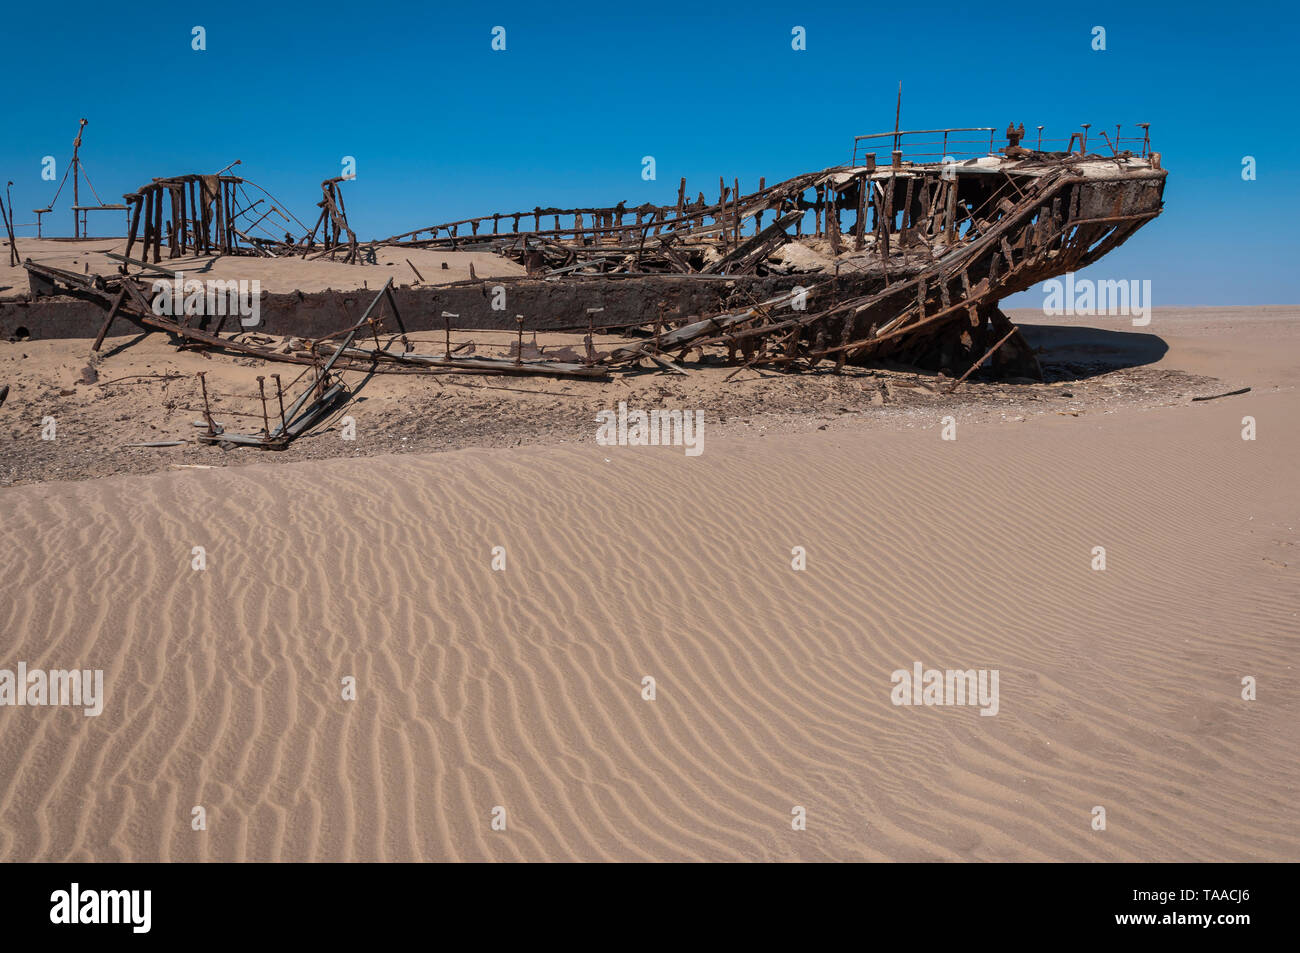 The shipwreck, Eduard Bohlen lies about 500 meters inland today after stranded in 1909 south of Conception Bay, Namibian coast. Stock Photo